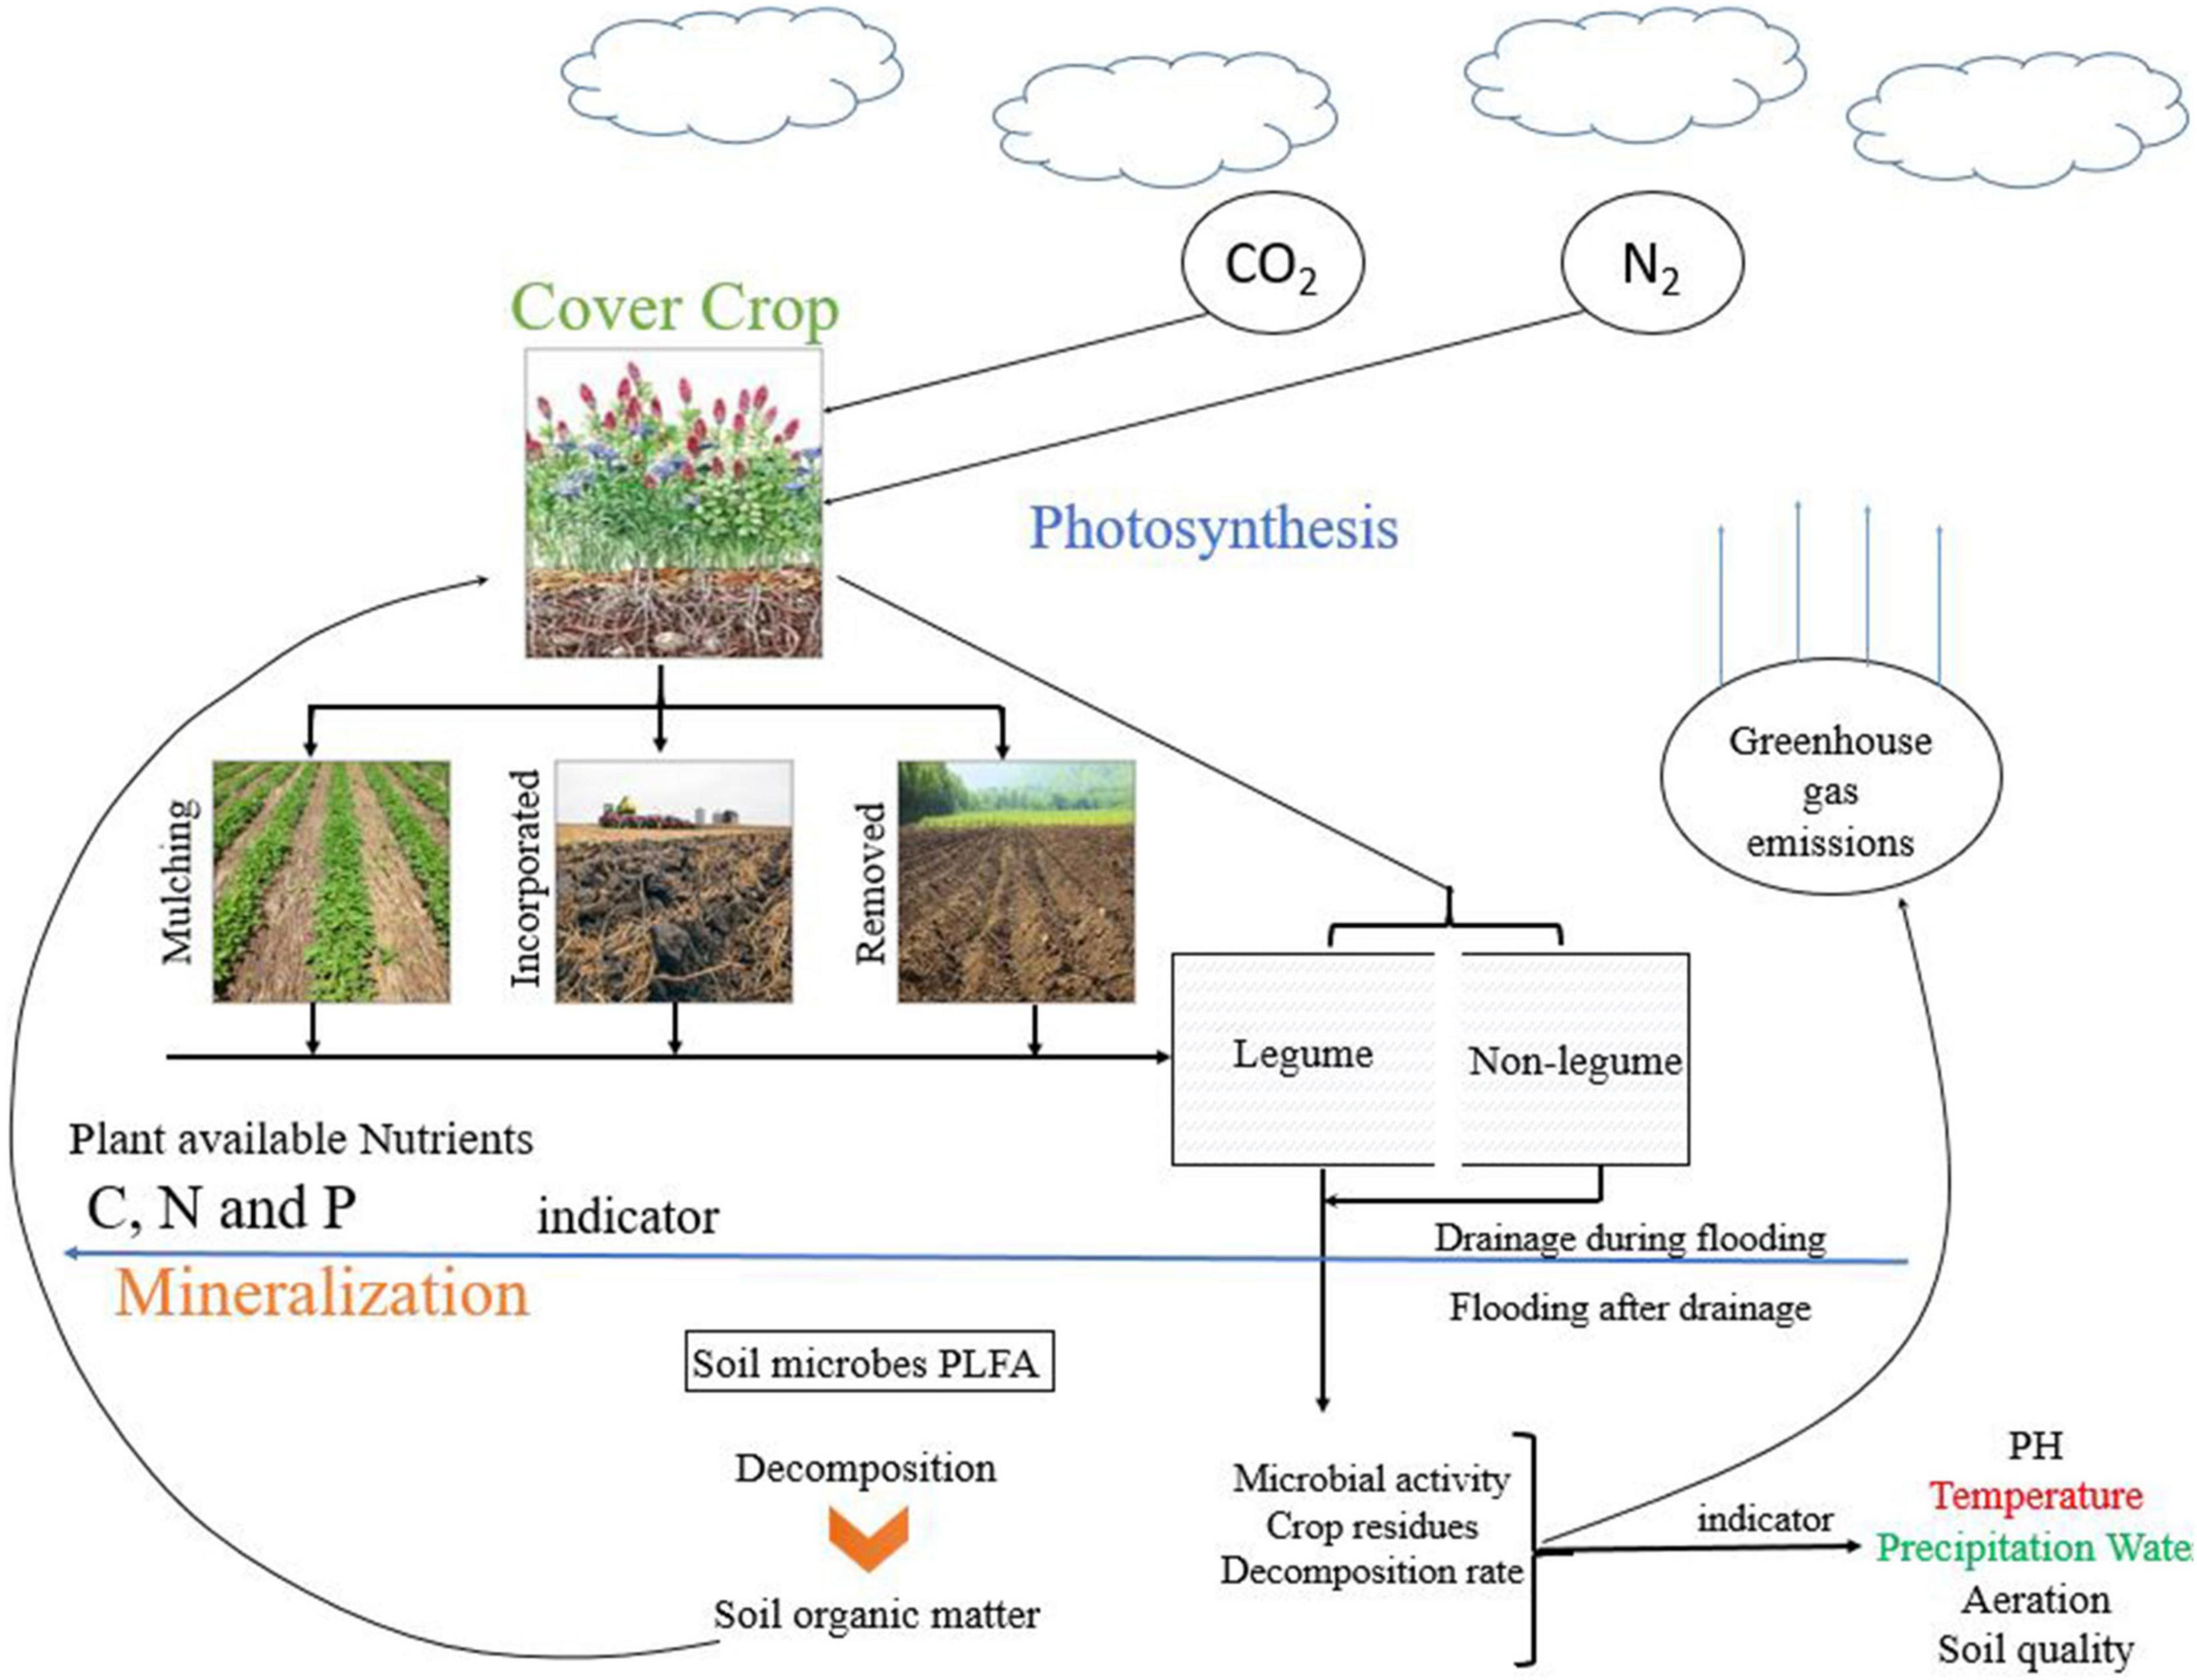 V. Impact of Hen-Raised Systems on Soil Health and Carbon Storage